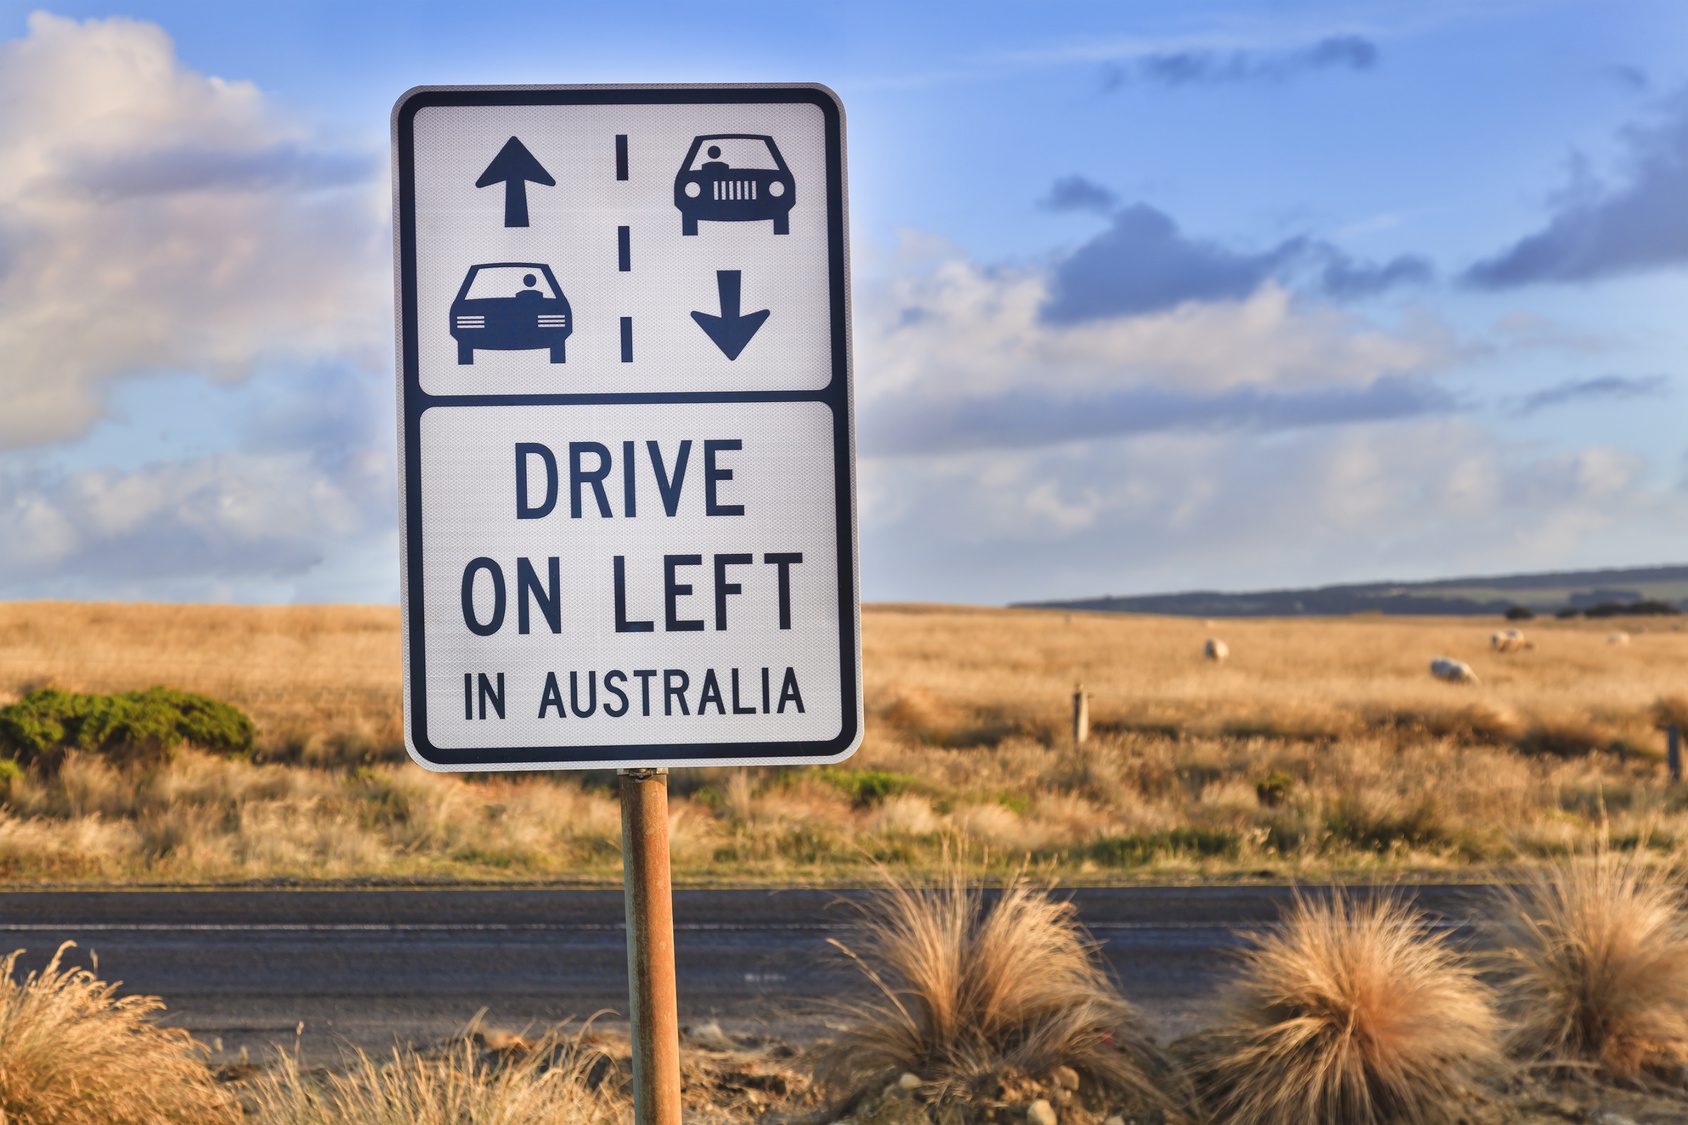 Commentary: OLA Finds Its Way on Aussie Roads